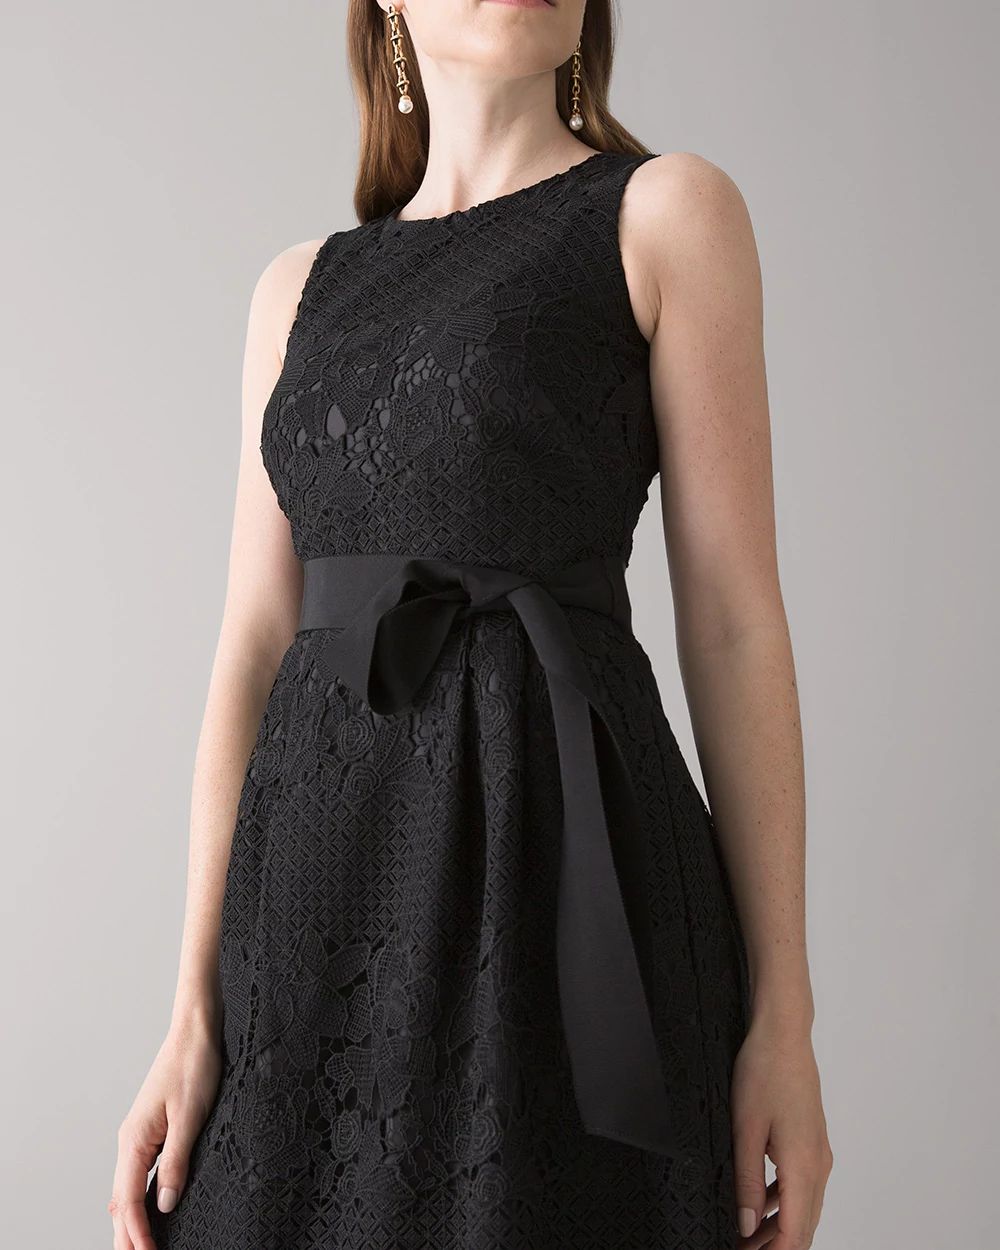 Petite Lace Fit & Flare Dress click to view larger image.